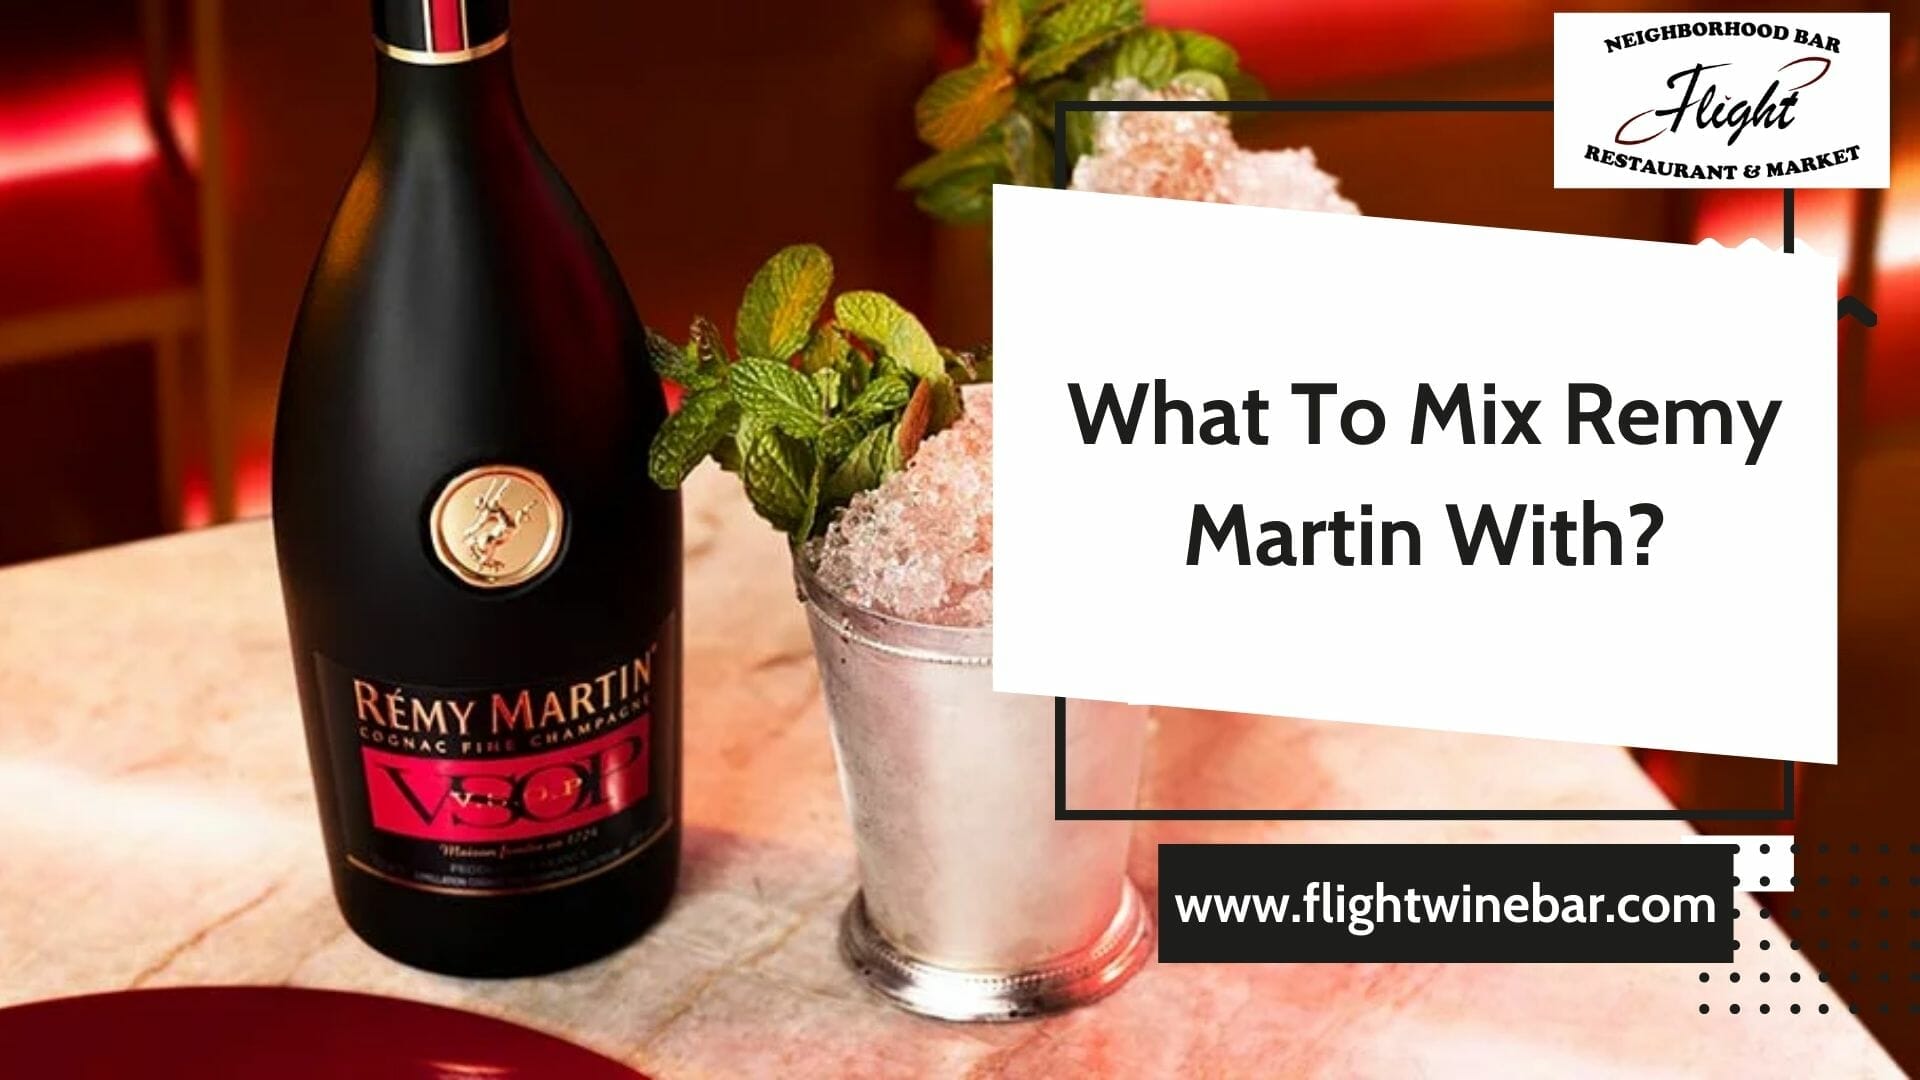 What To Mix Remy Martin With